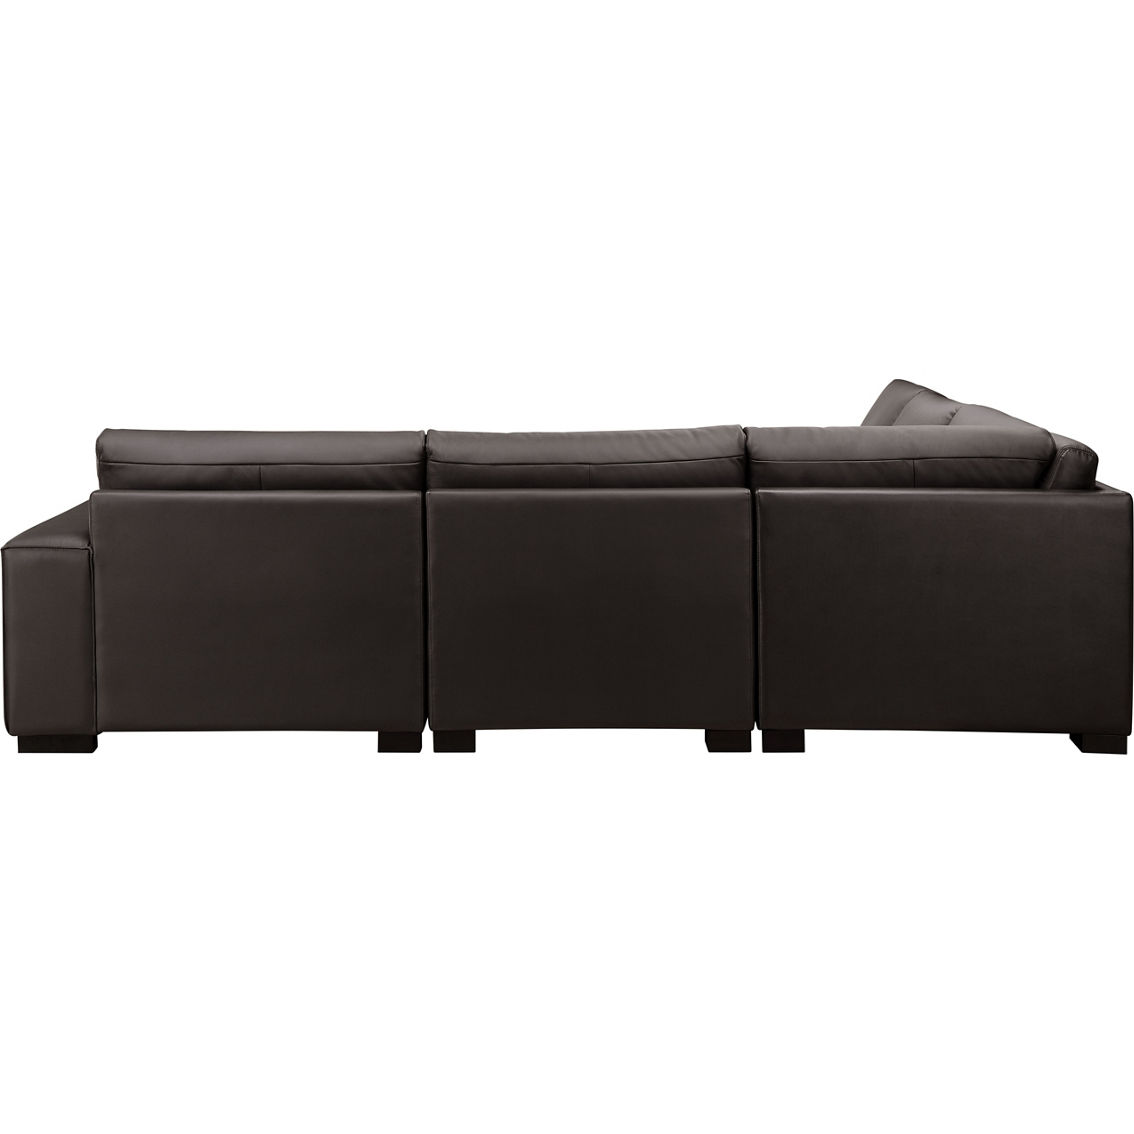 Abbyson Teagan Leather Modular Sectional 6 pc. - Image 2 of 9